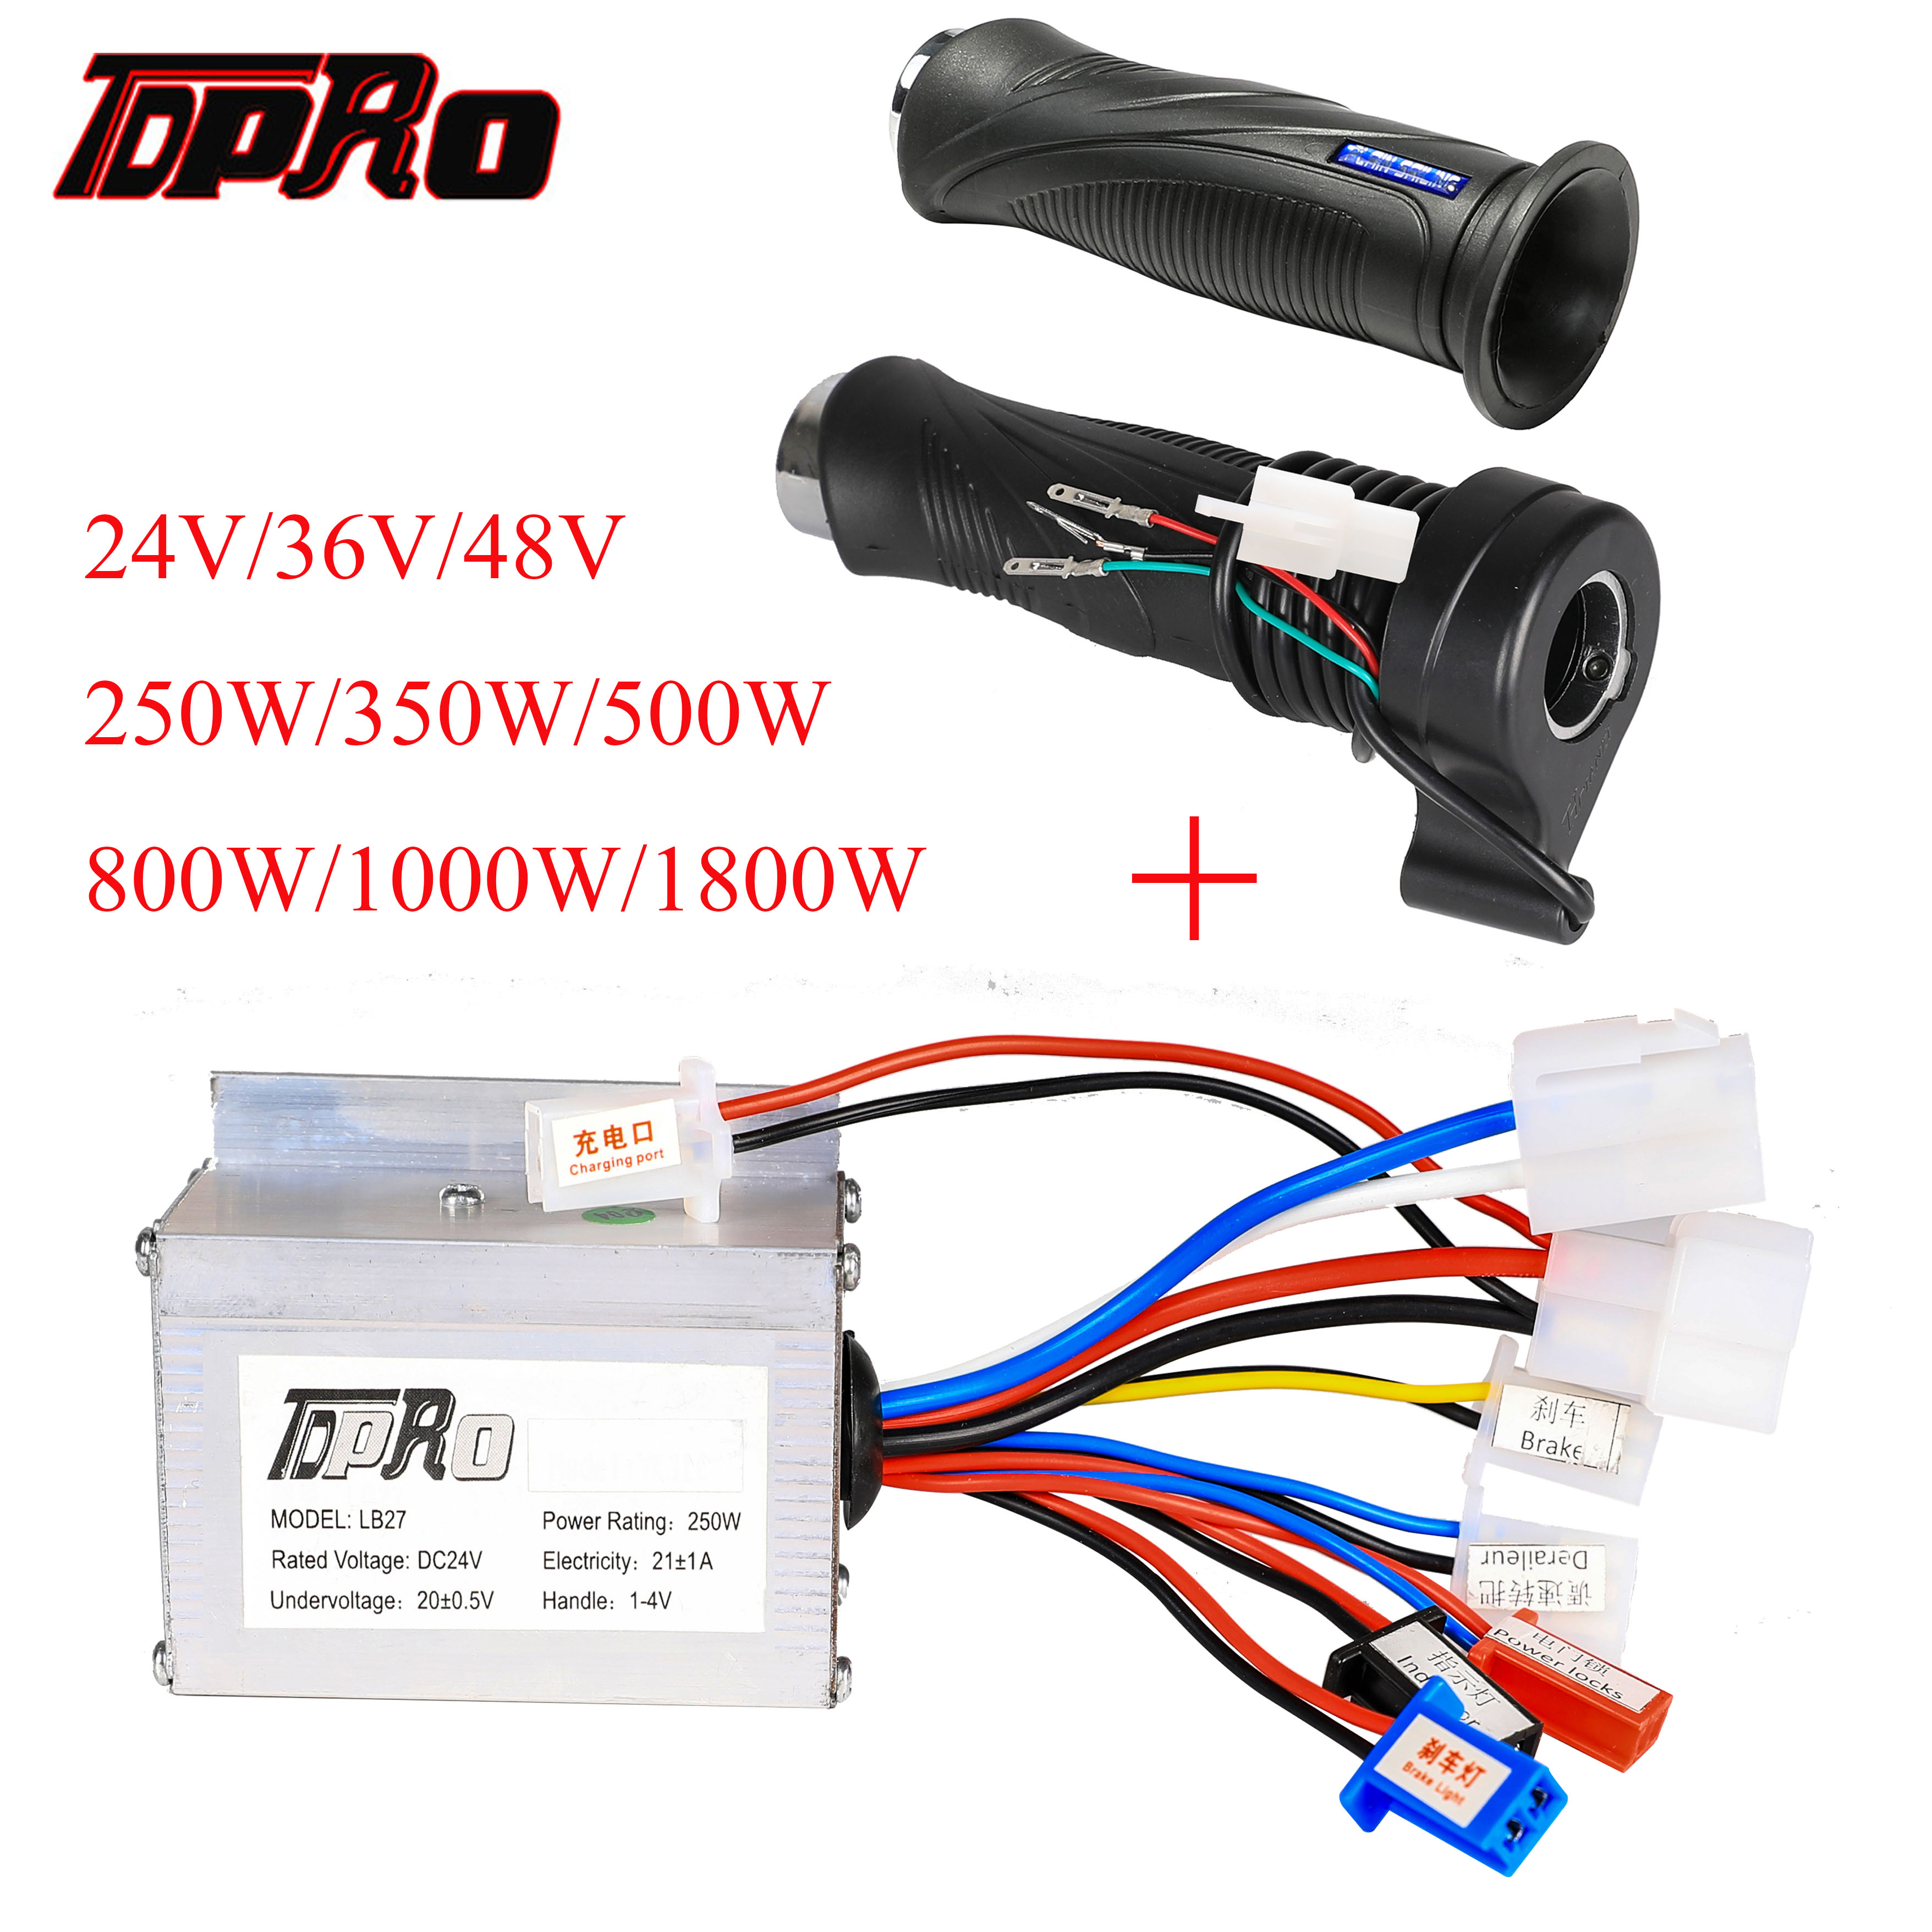 DC 24V 500W Motor Speed Brush Controller 30A For Electric Bicycle Bike Scooter